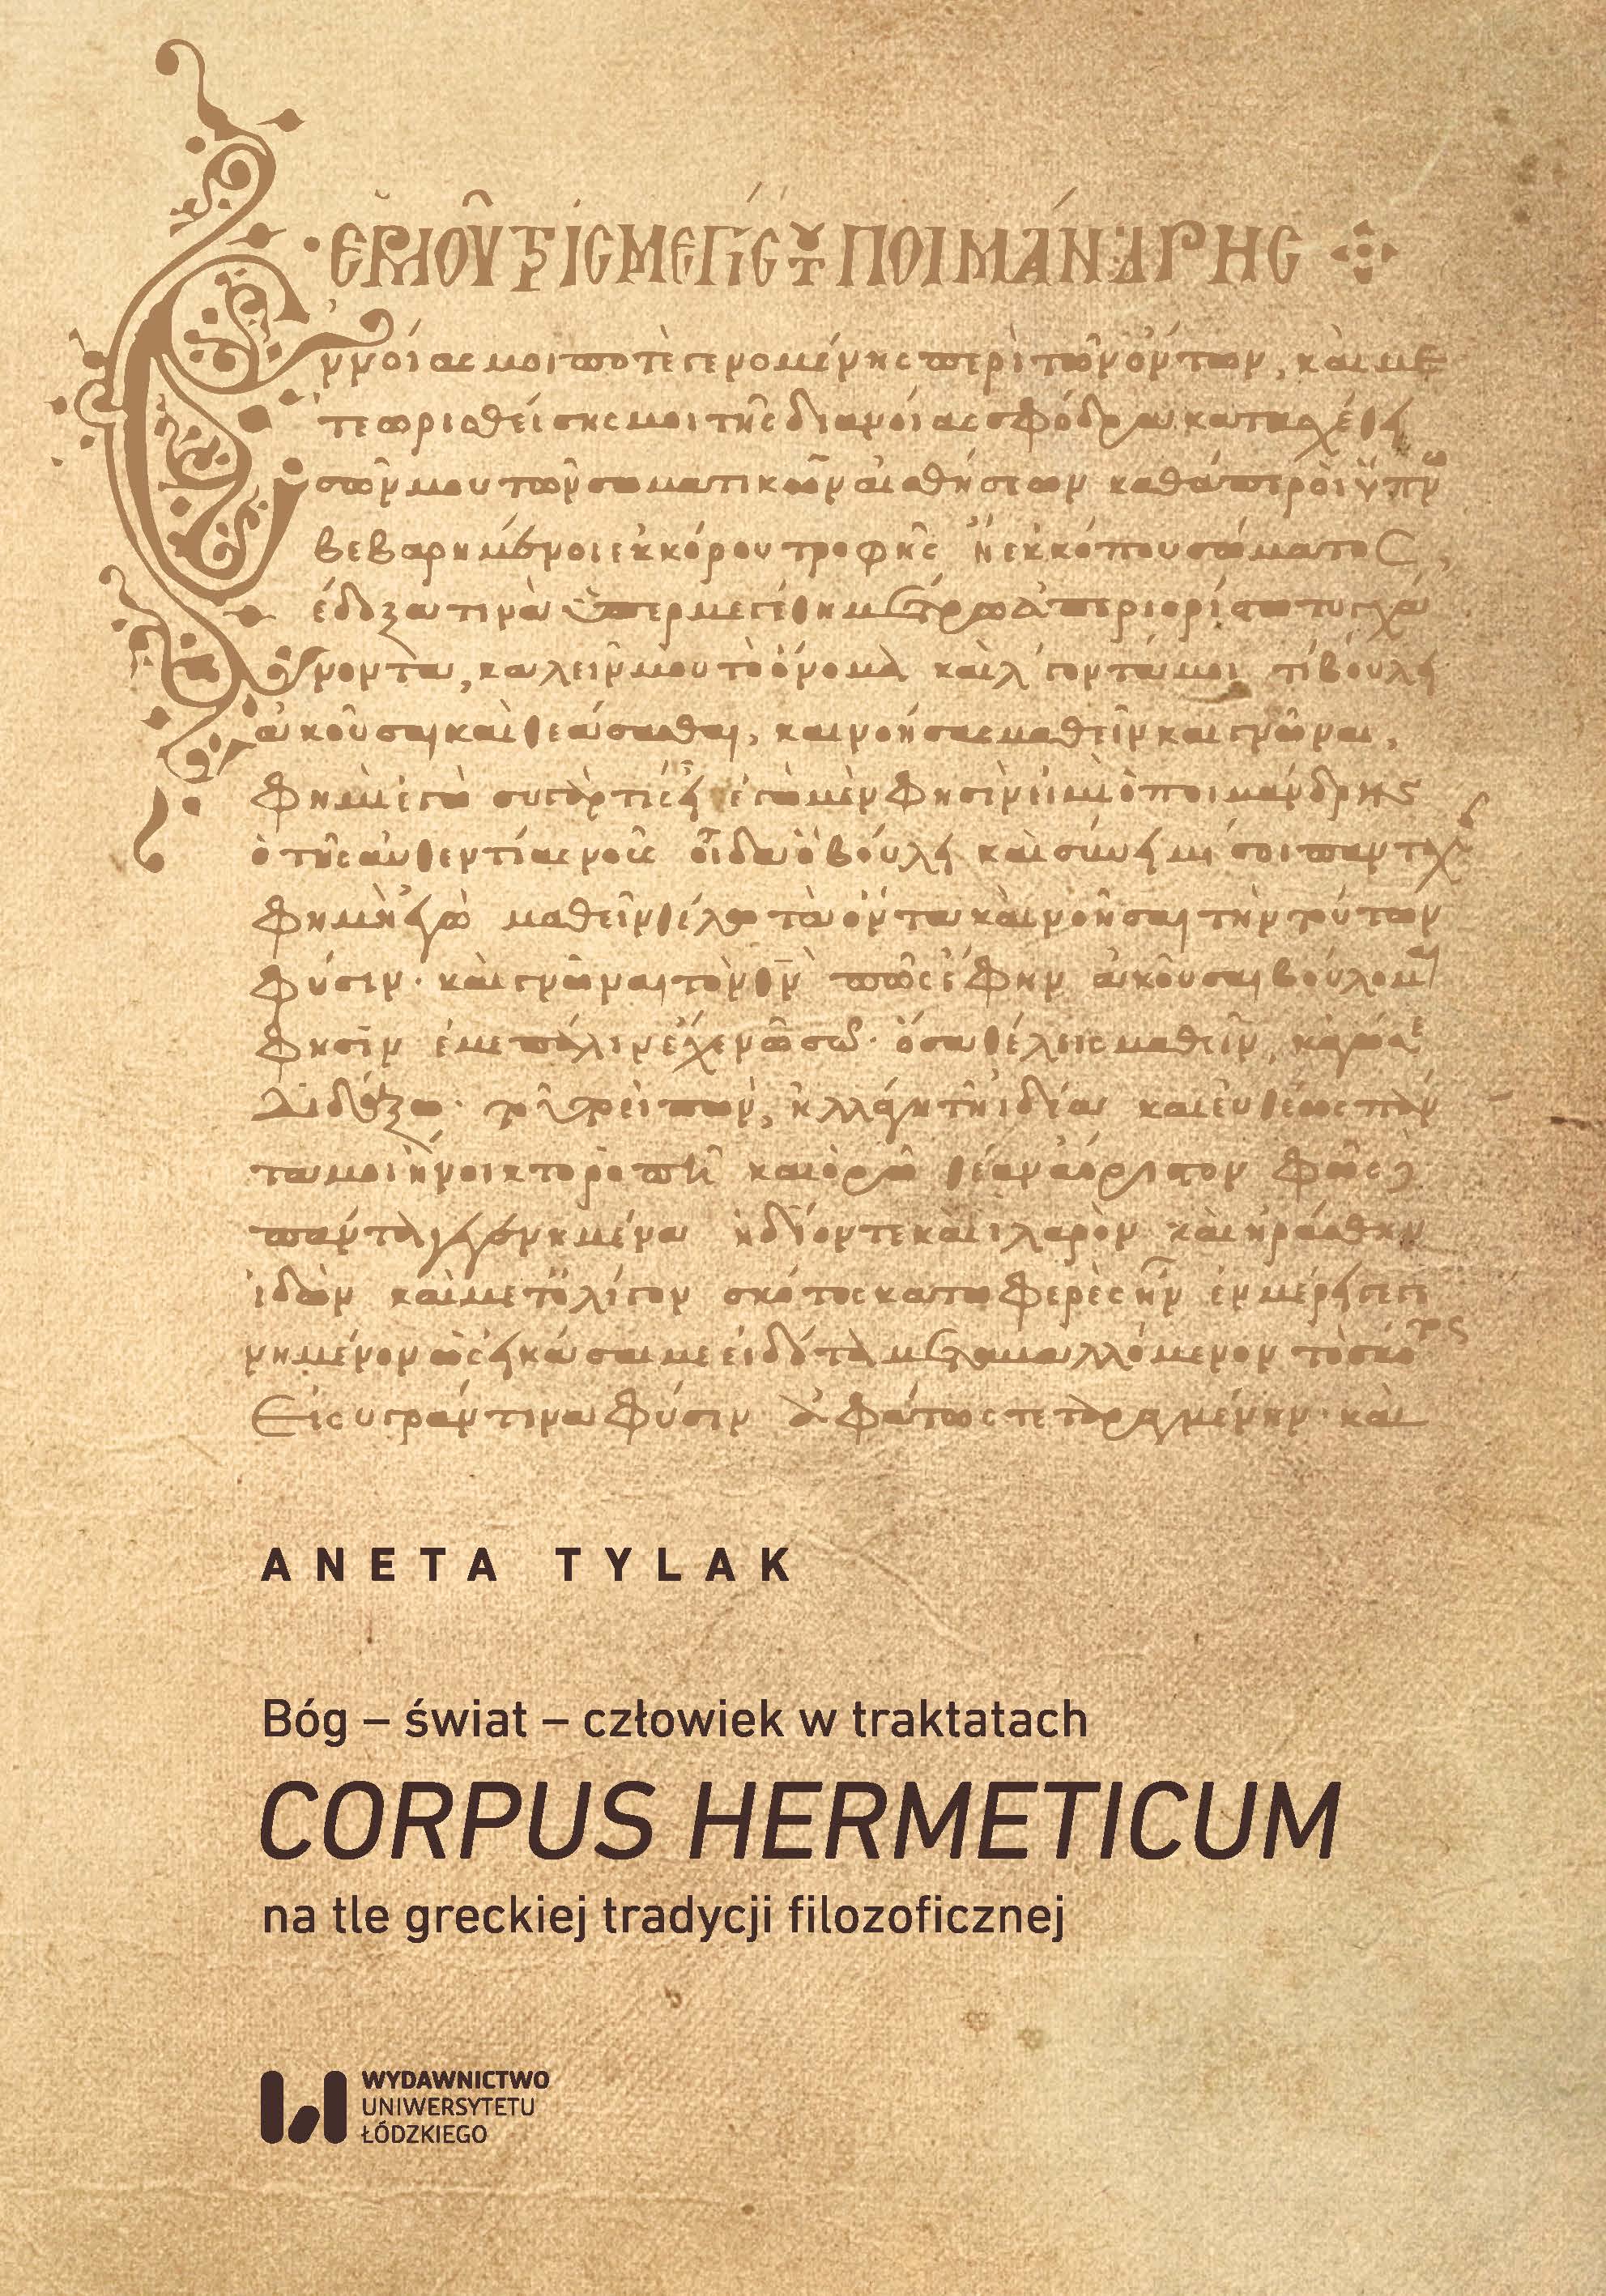 God, Cosmos and Man in the "Corpus Hermeticum" on the Background of Greek Philosophical Tradition.